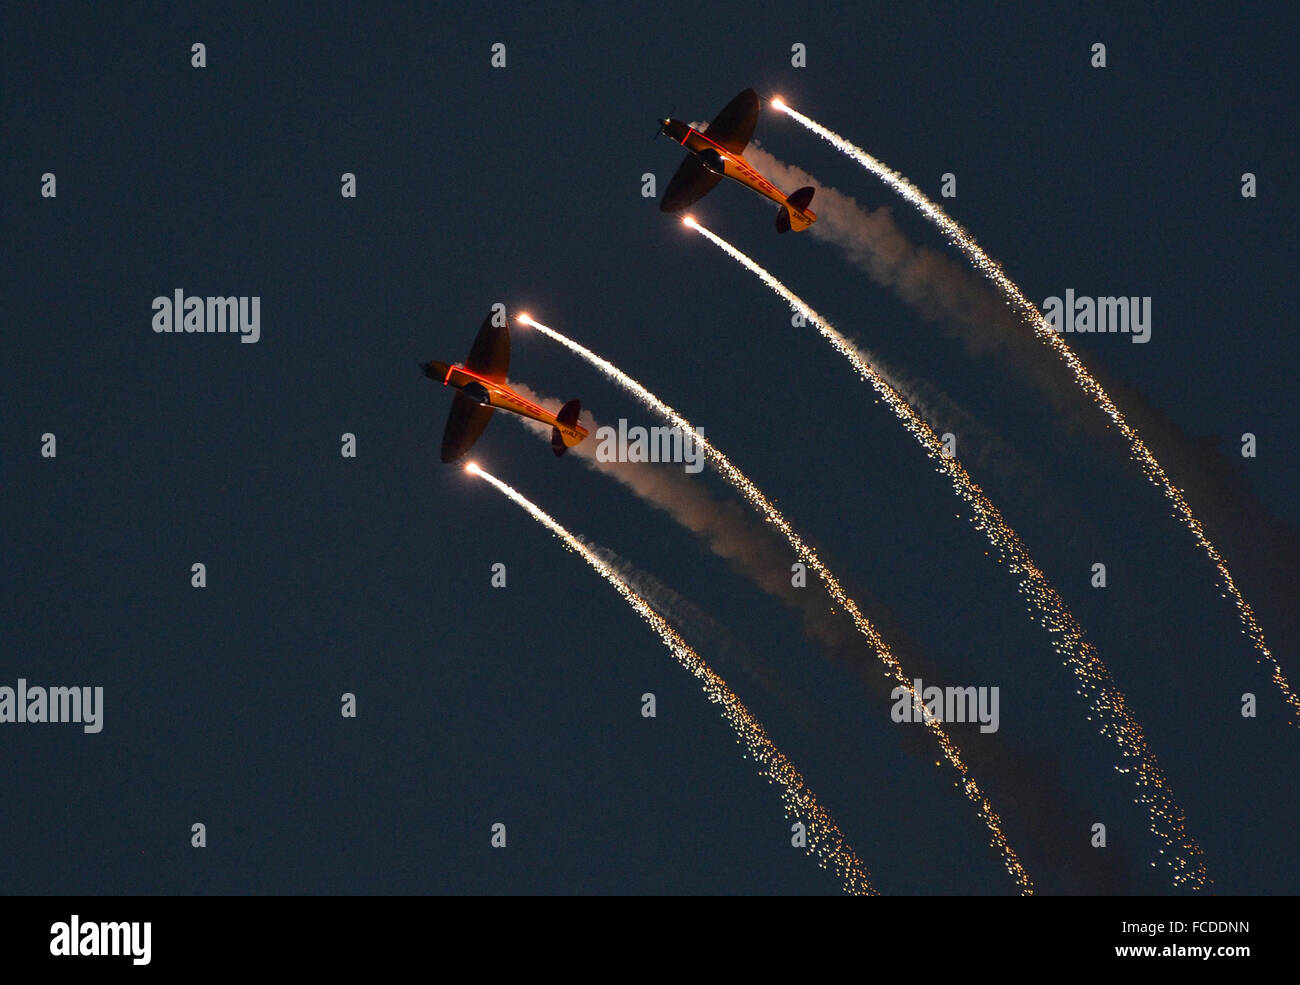 Bahrain Air Show, 21st January 2016. The Twister aerobatic team perform a stunning aerial ballet with pyrotechnics after sunset at the 2016 Bahrain Air Show. Credit:  Steve Nichols/Alamy Live News Stock Photo